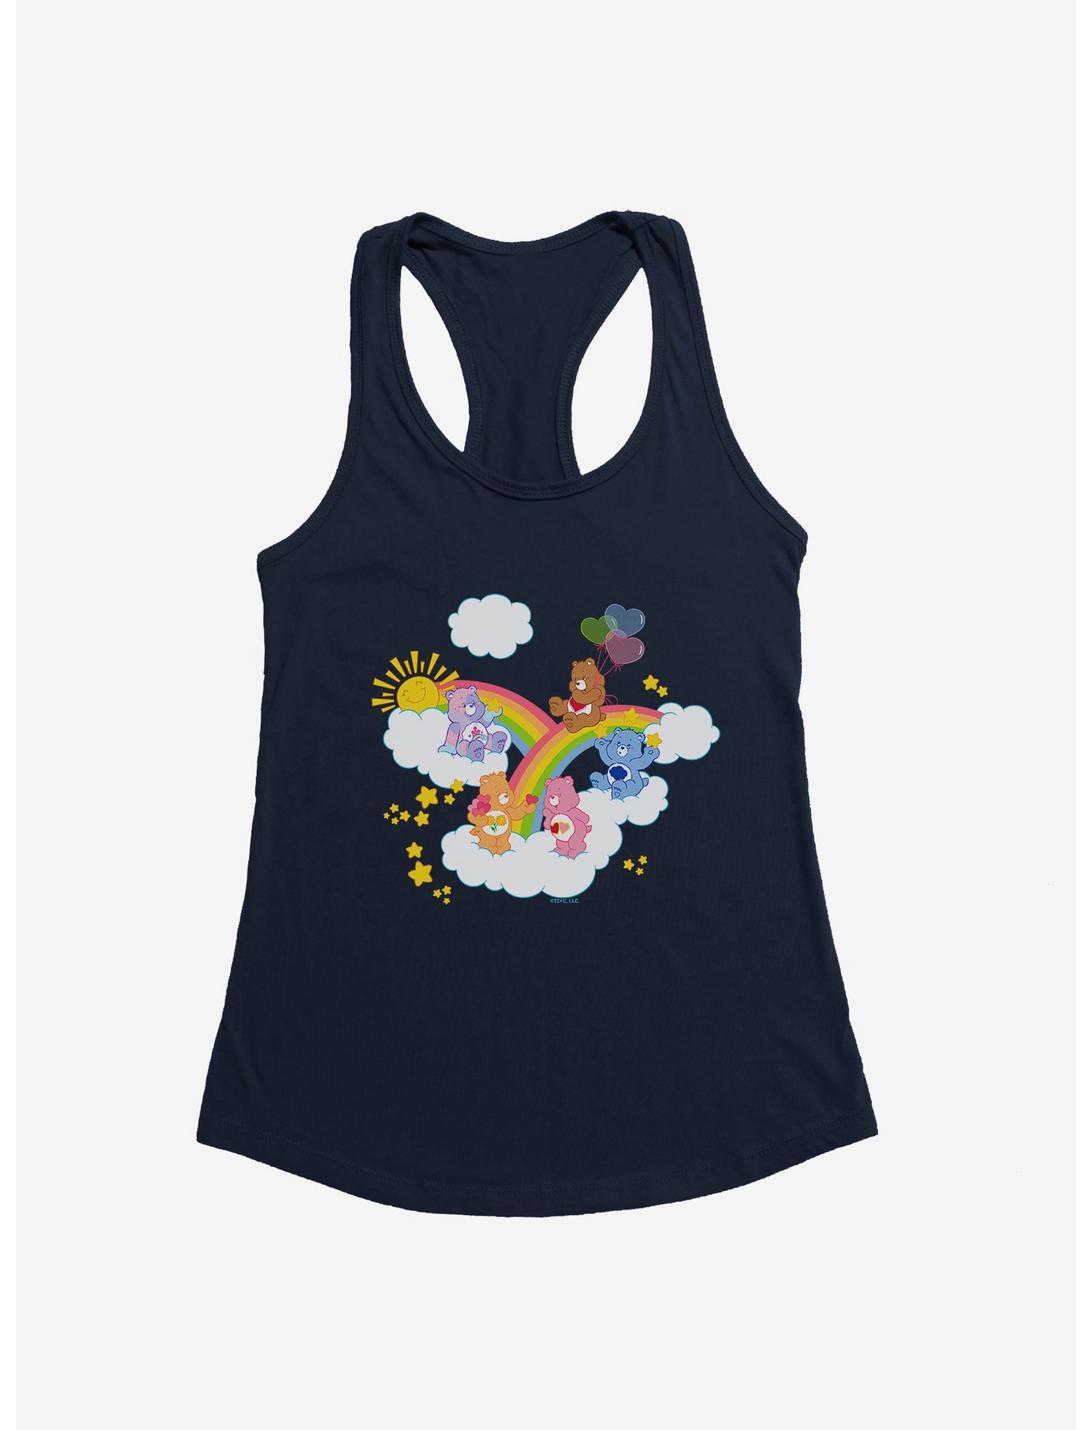 Care Bears Over The Rainbow Girls Tank Top, NAVY, hi-res